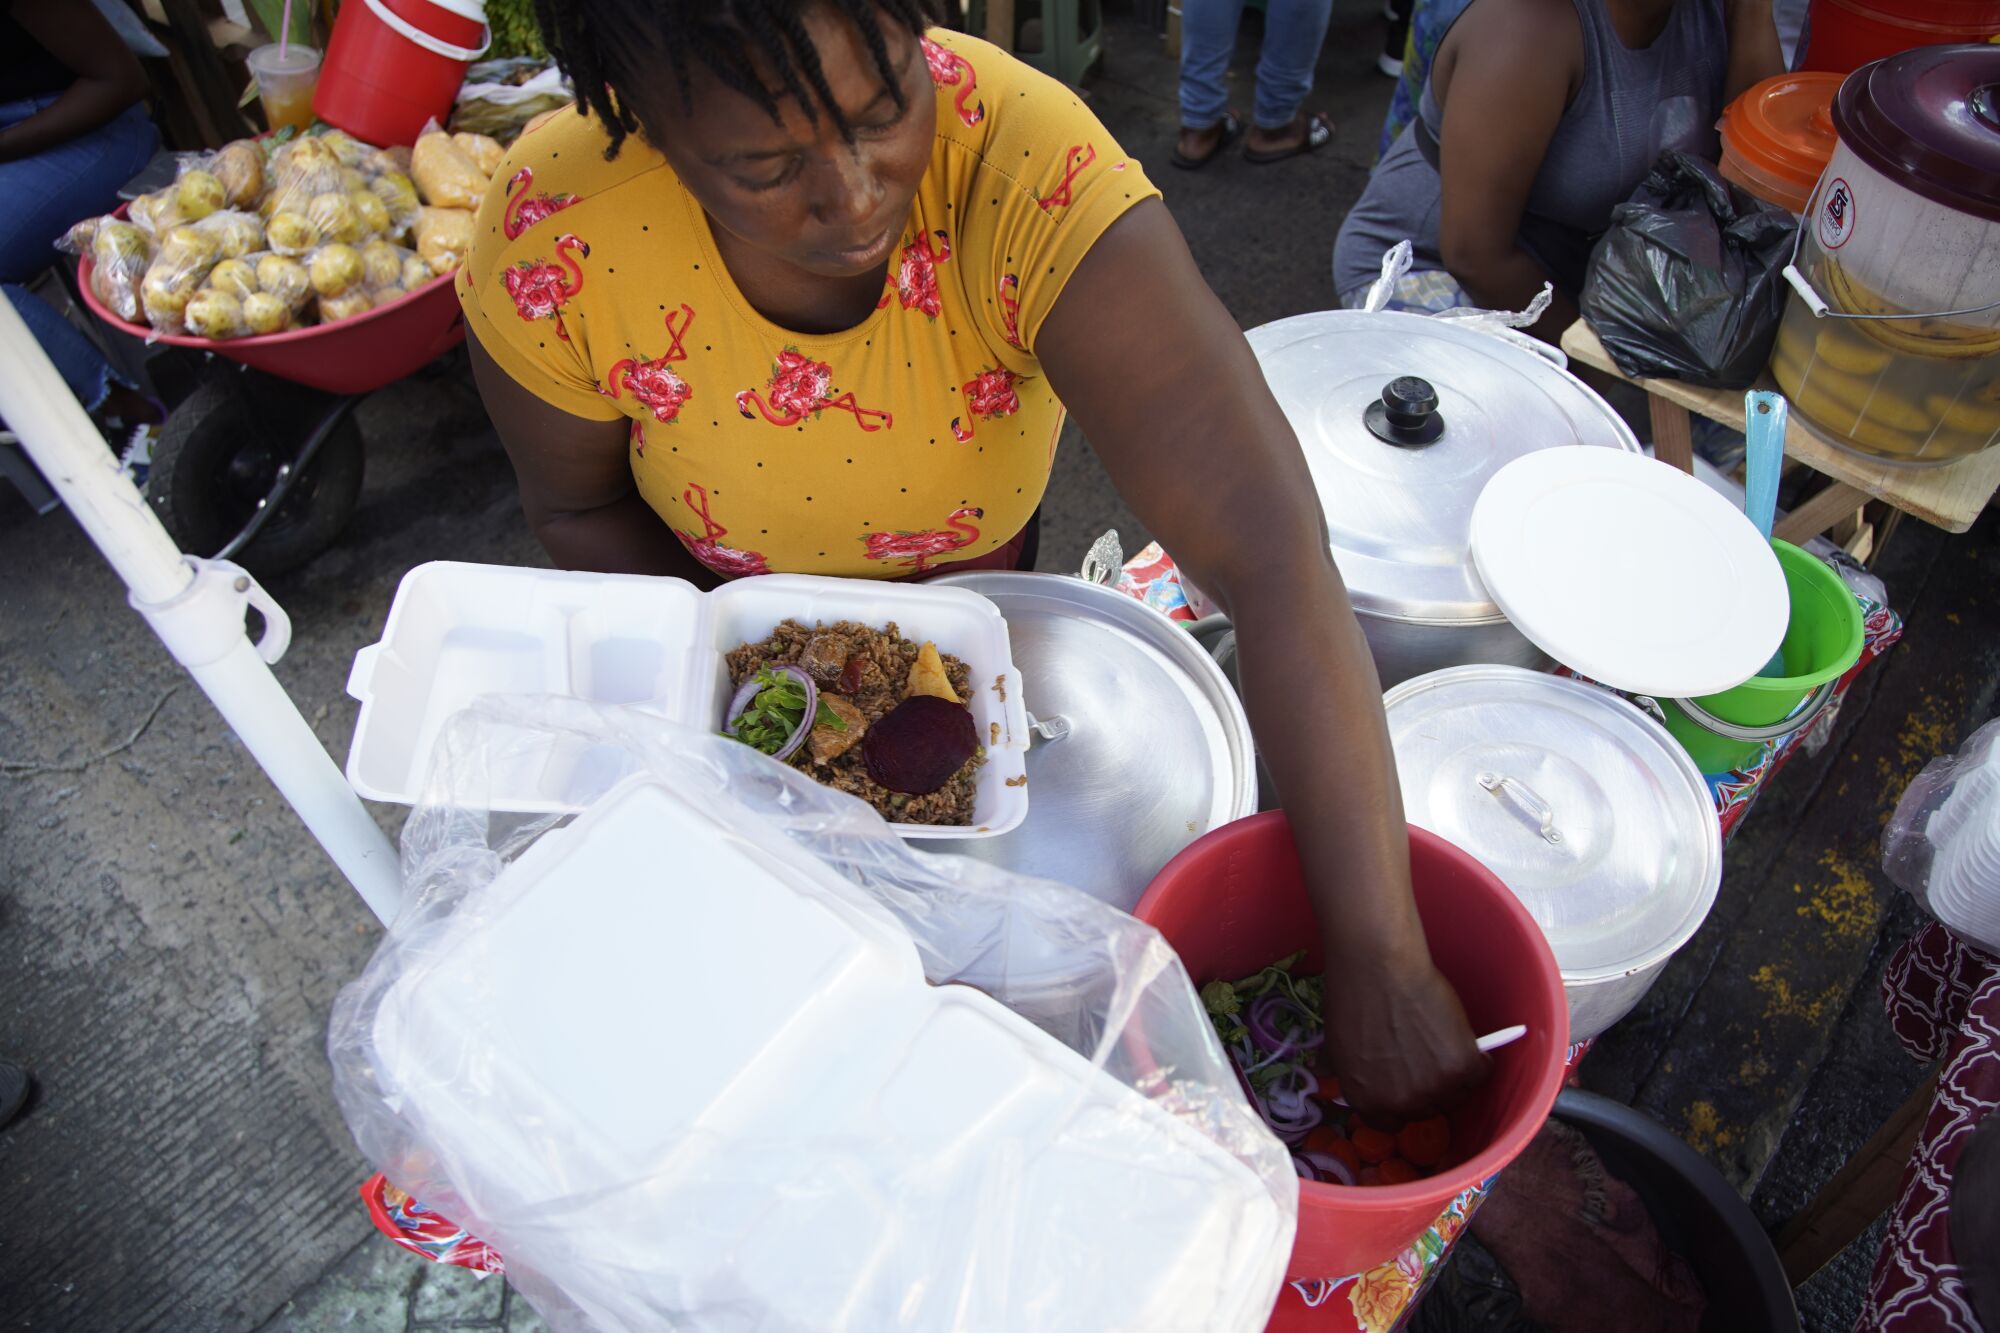 A woman sells Haitian food at a street market in downtown Tapachula